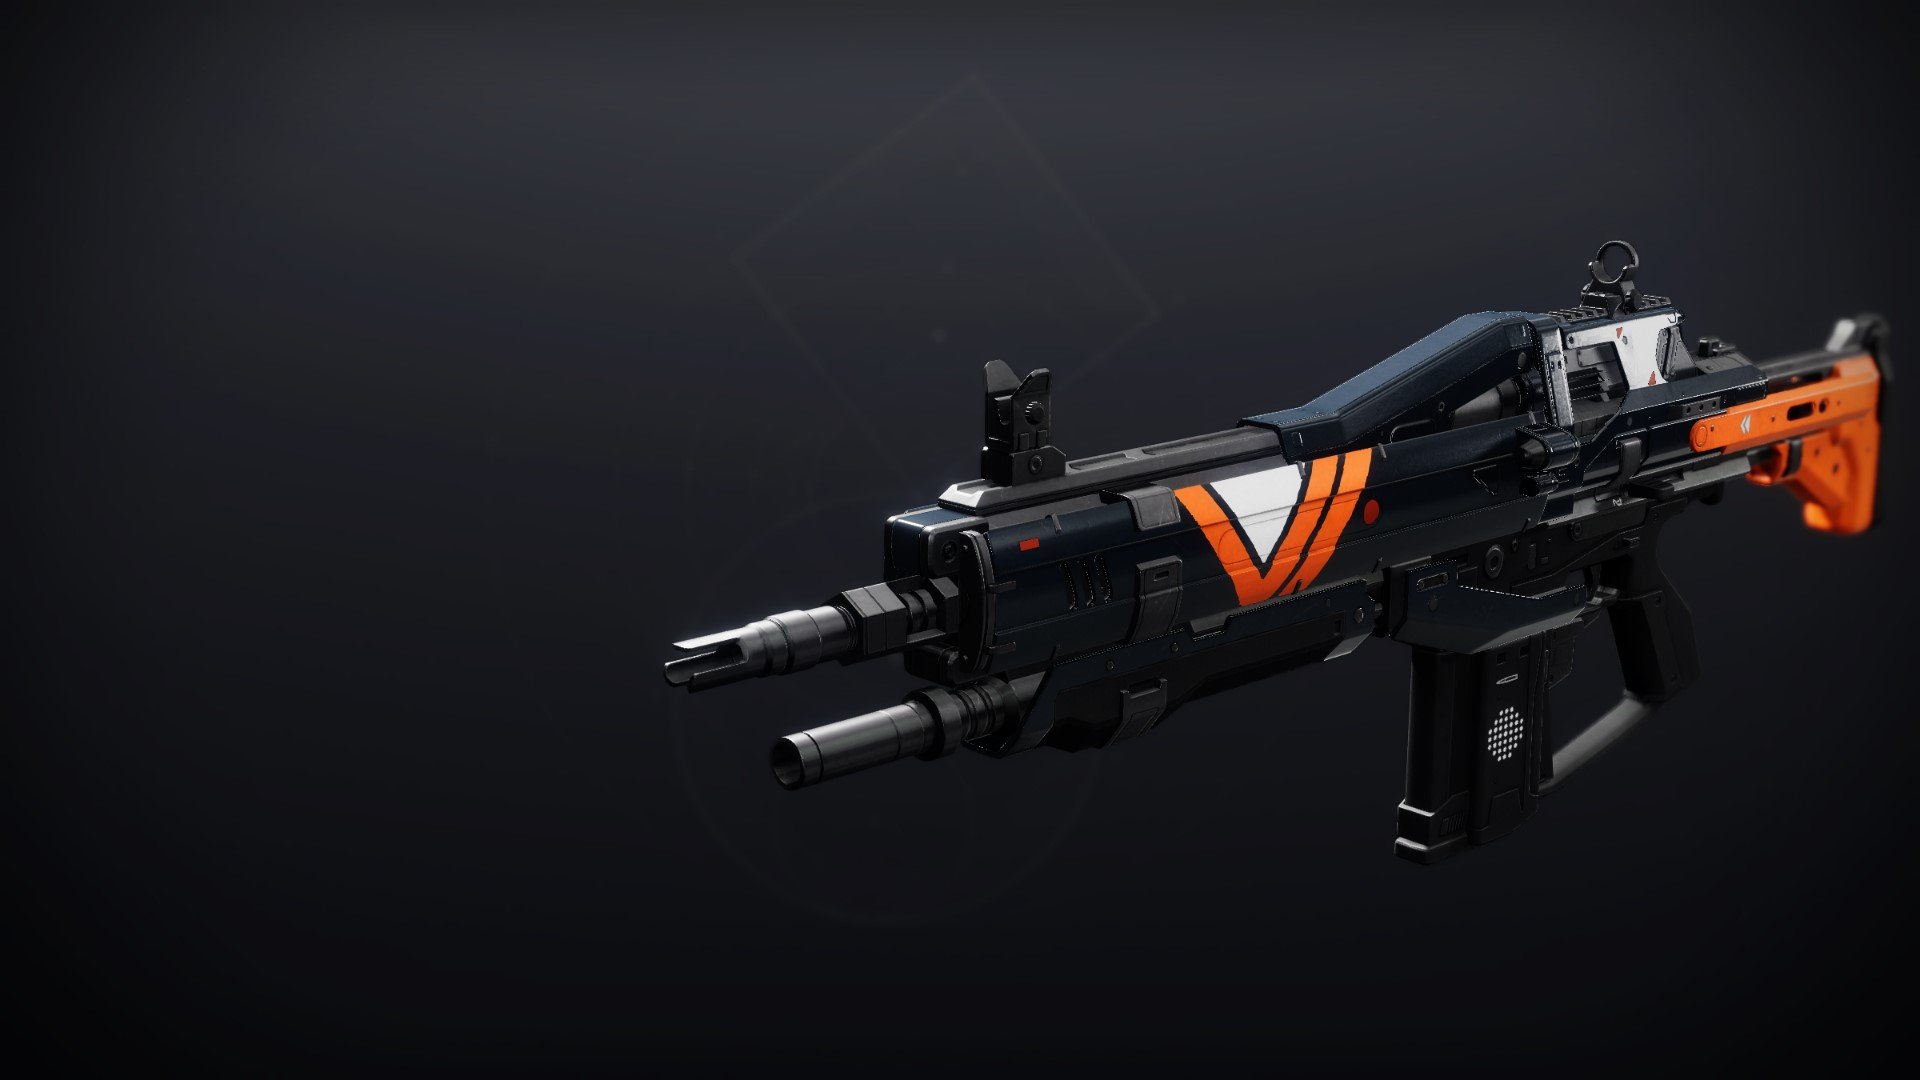 An in-game render of the Shadow Price.